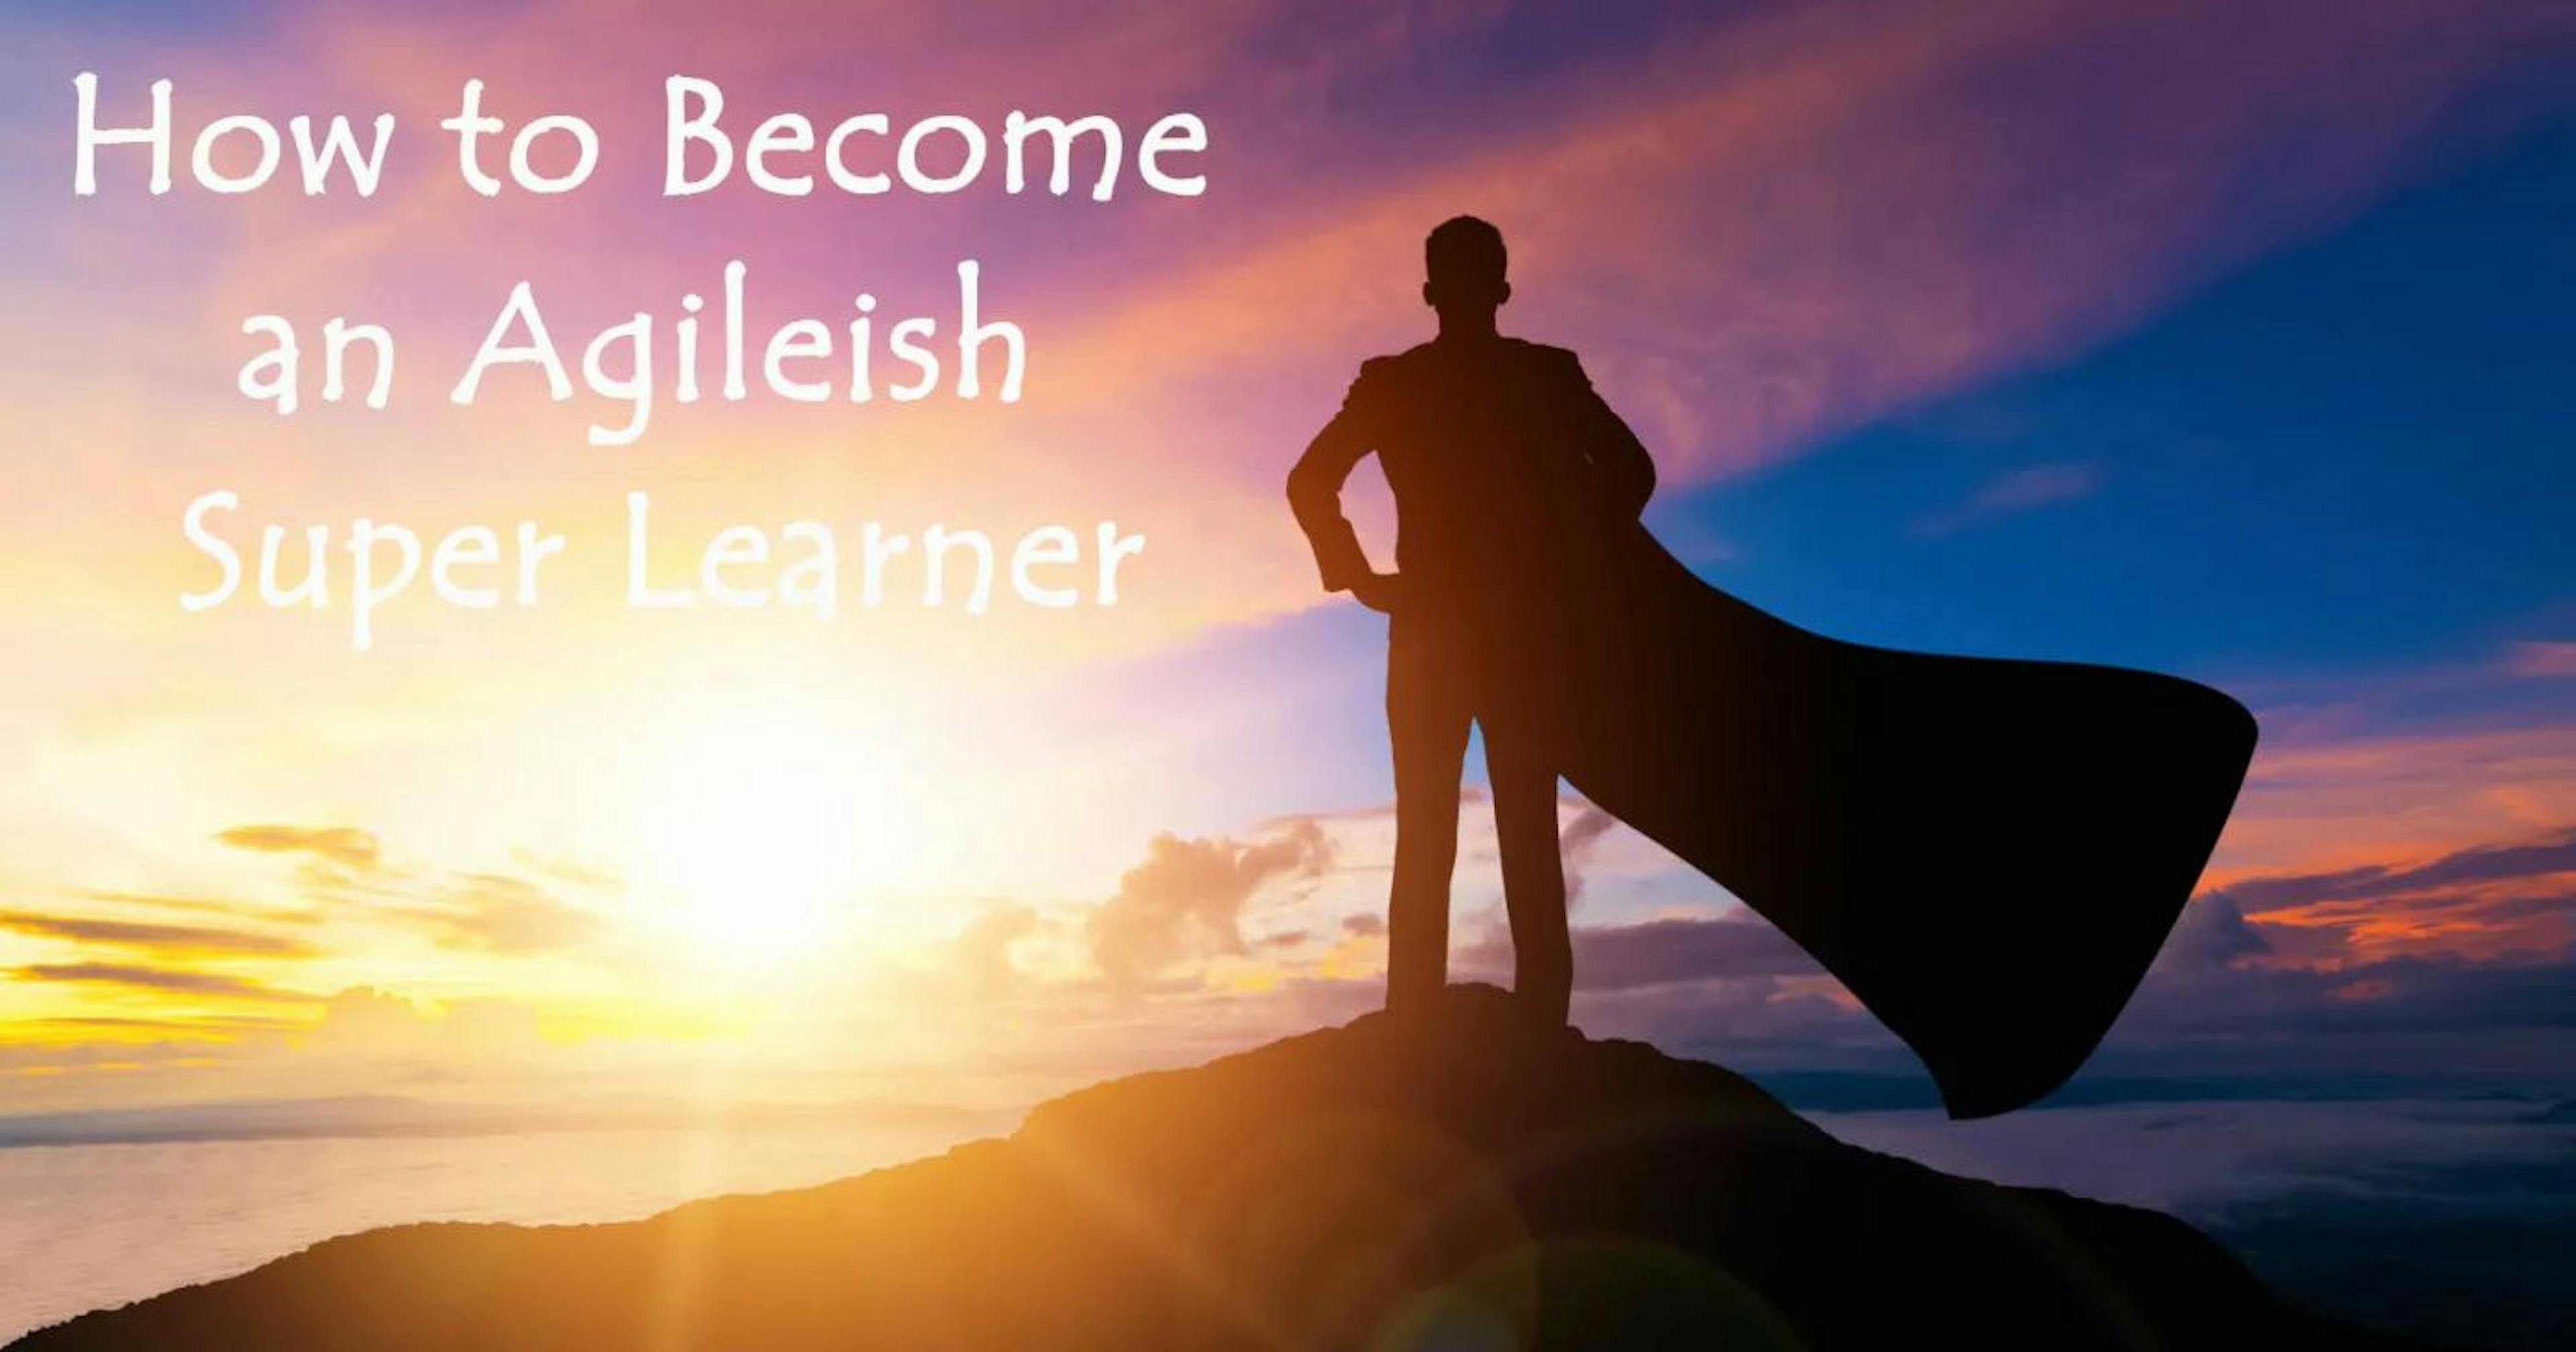 featured image - How to Become an Agileish Super Learner